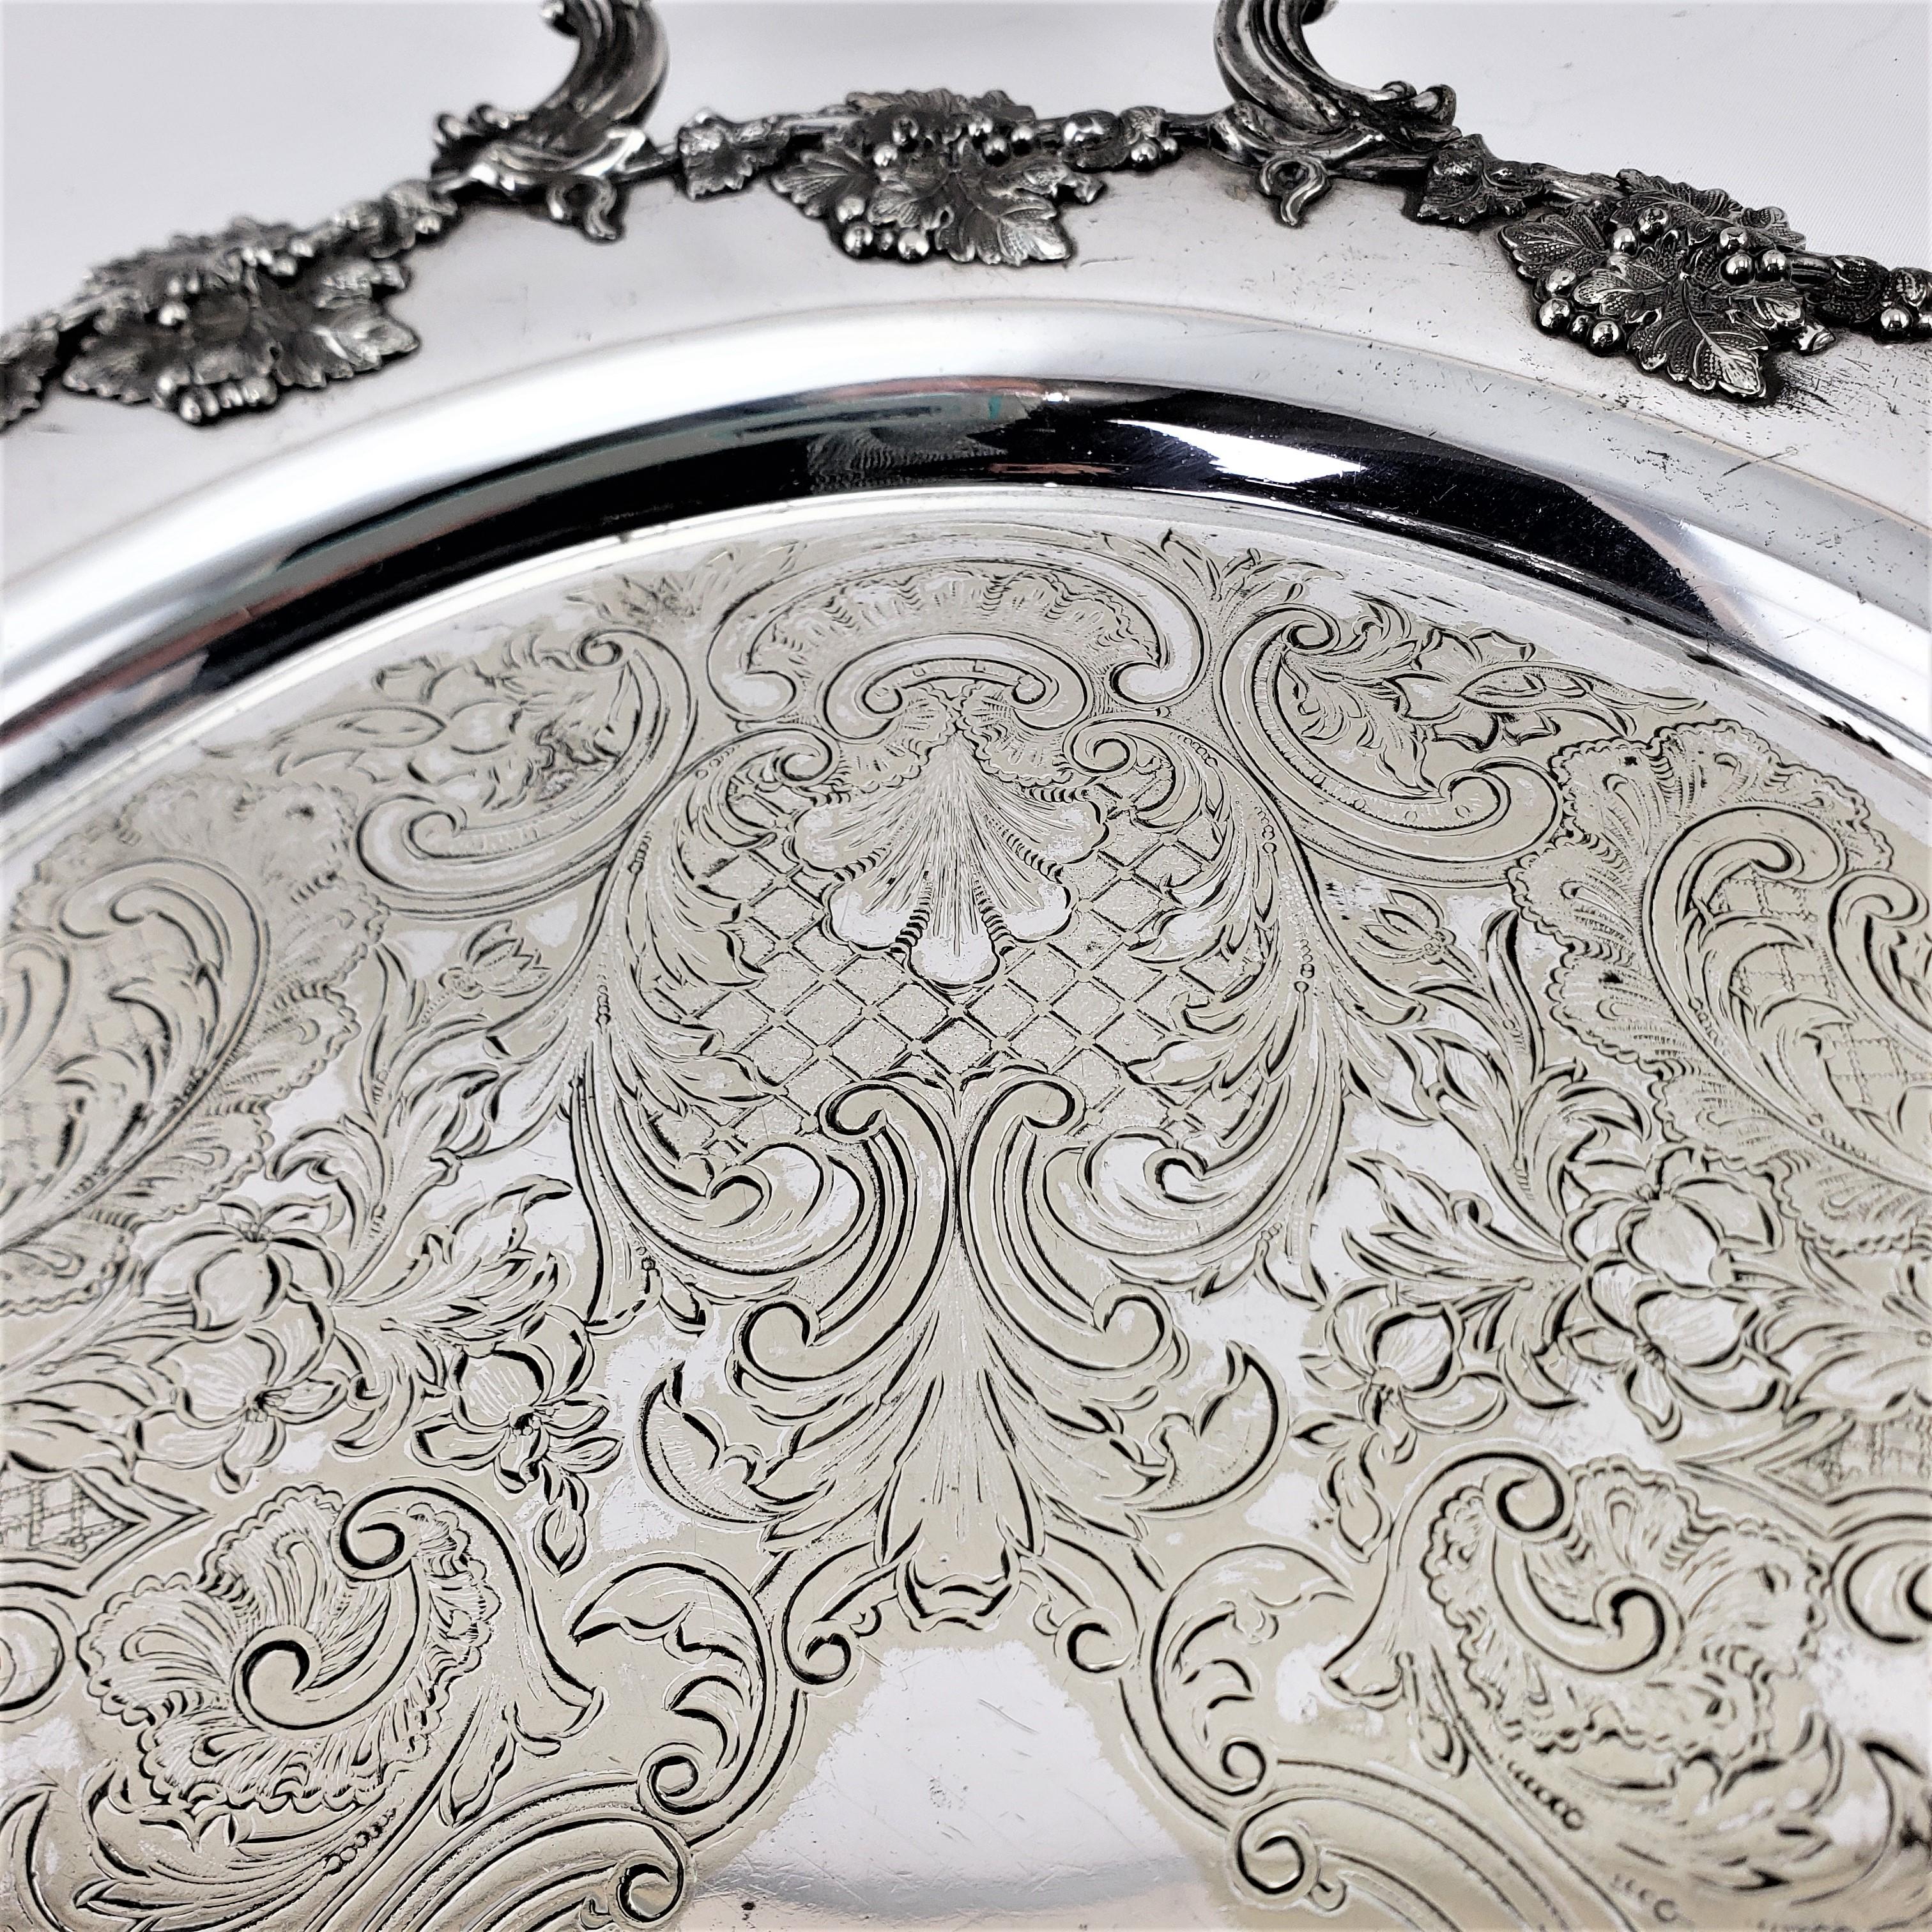 Large Antique Barker-Ellis Silver Plated Serving Tray with Berry & Leaf Decor 2